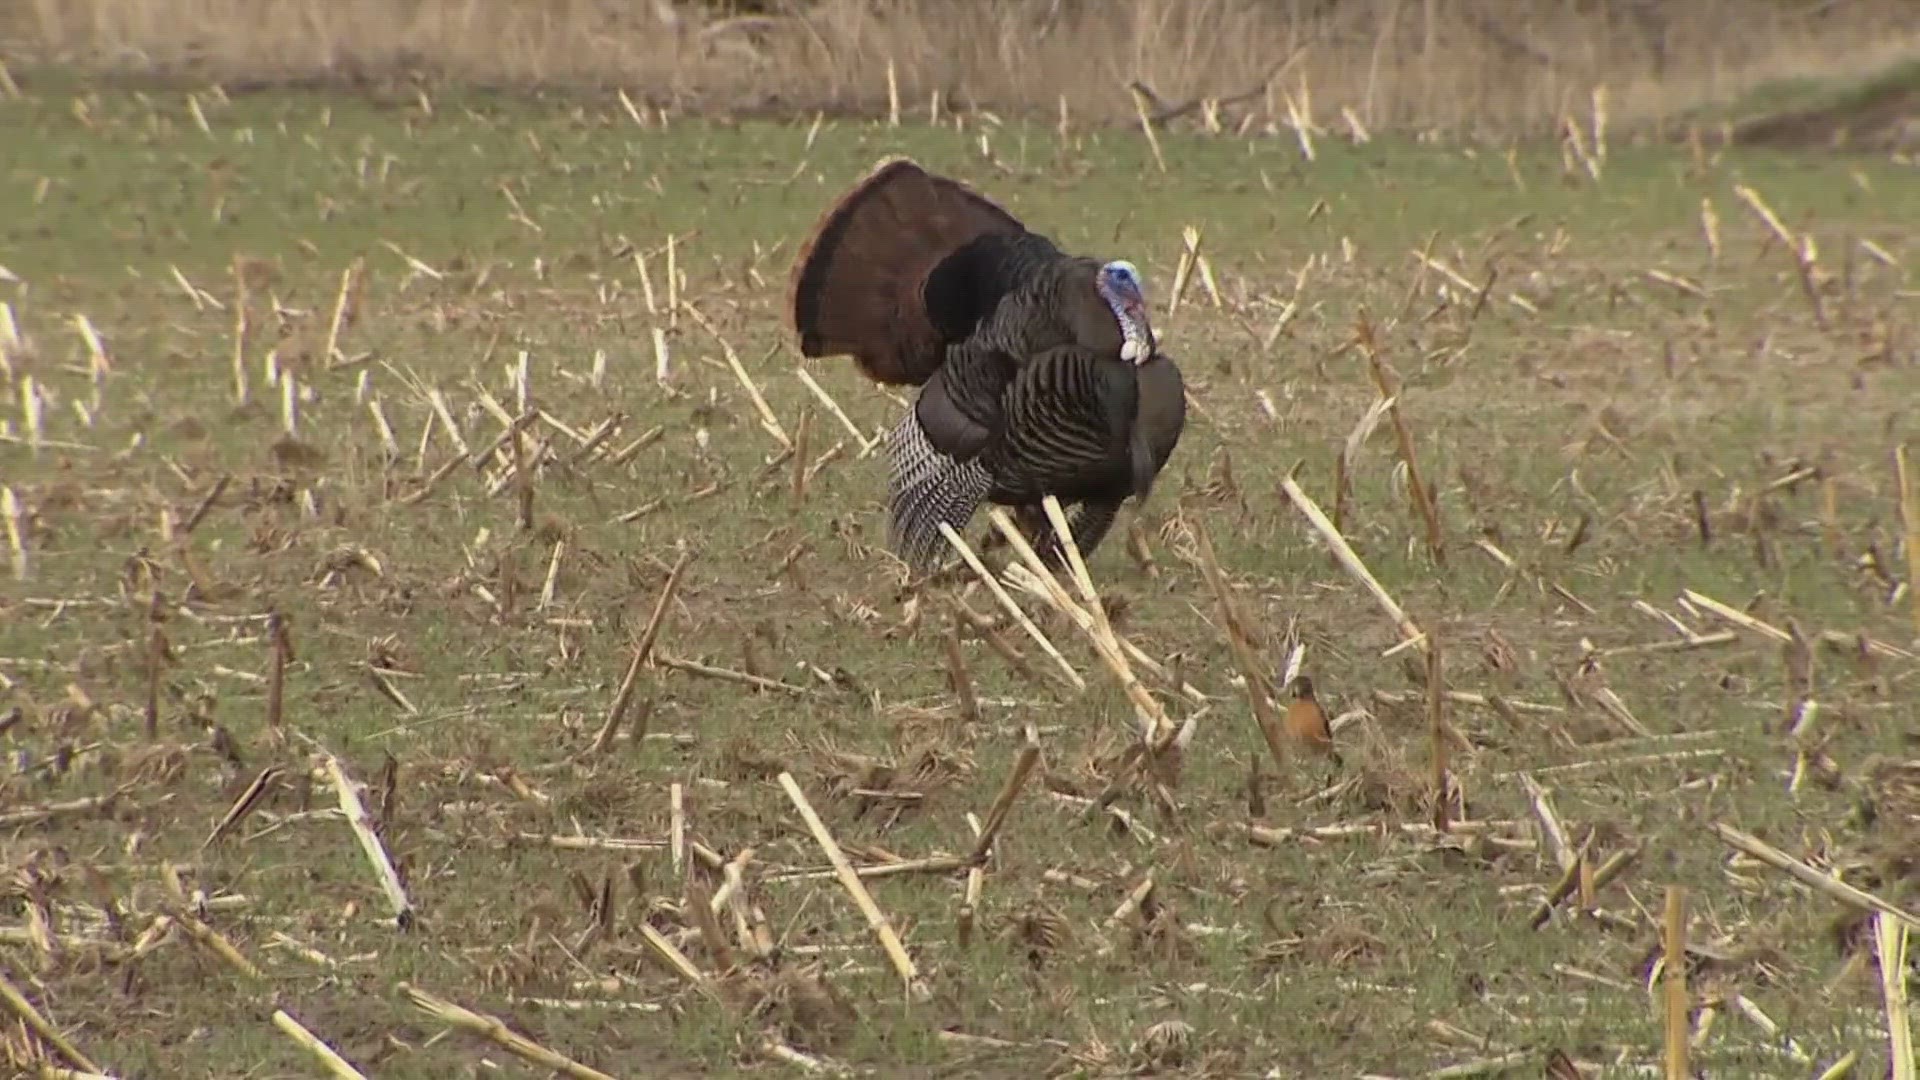 The Wild Turkey Program Coordinator for TWRA said he suspects West and Middle Tennessee will see the best harvest.